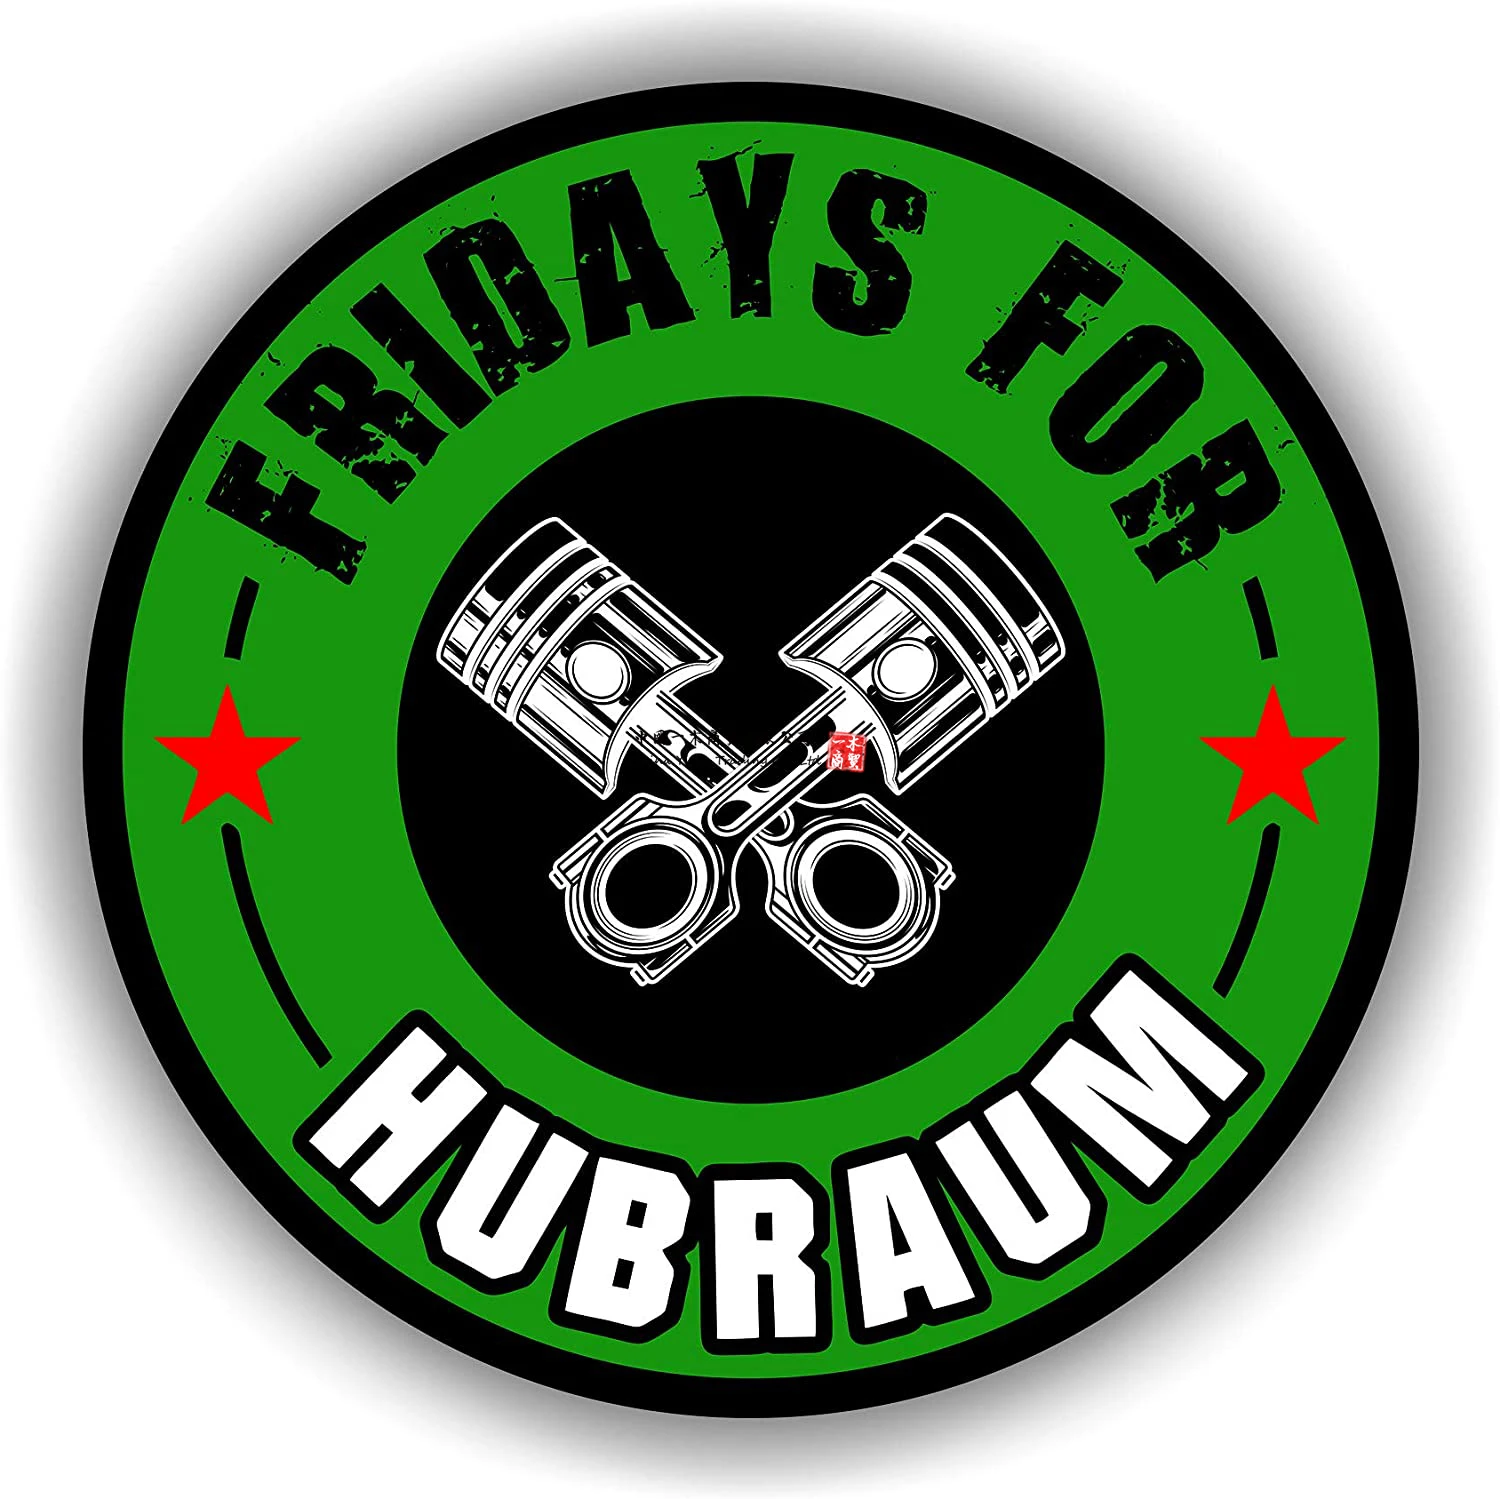 

Finest Folia Fridays For Hubraum Sticker Fun Sticker For Car Motorcycle Climate Truck